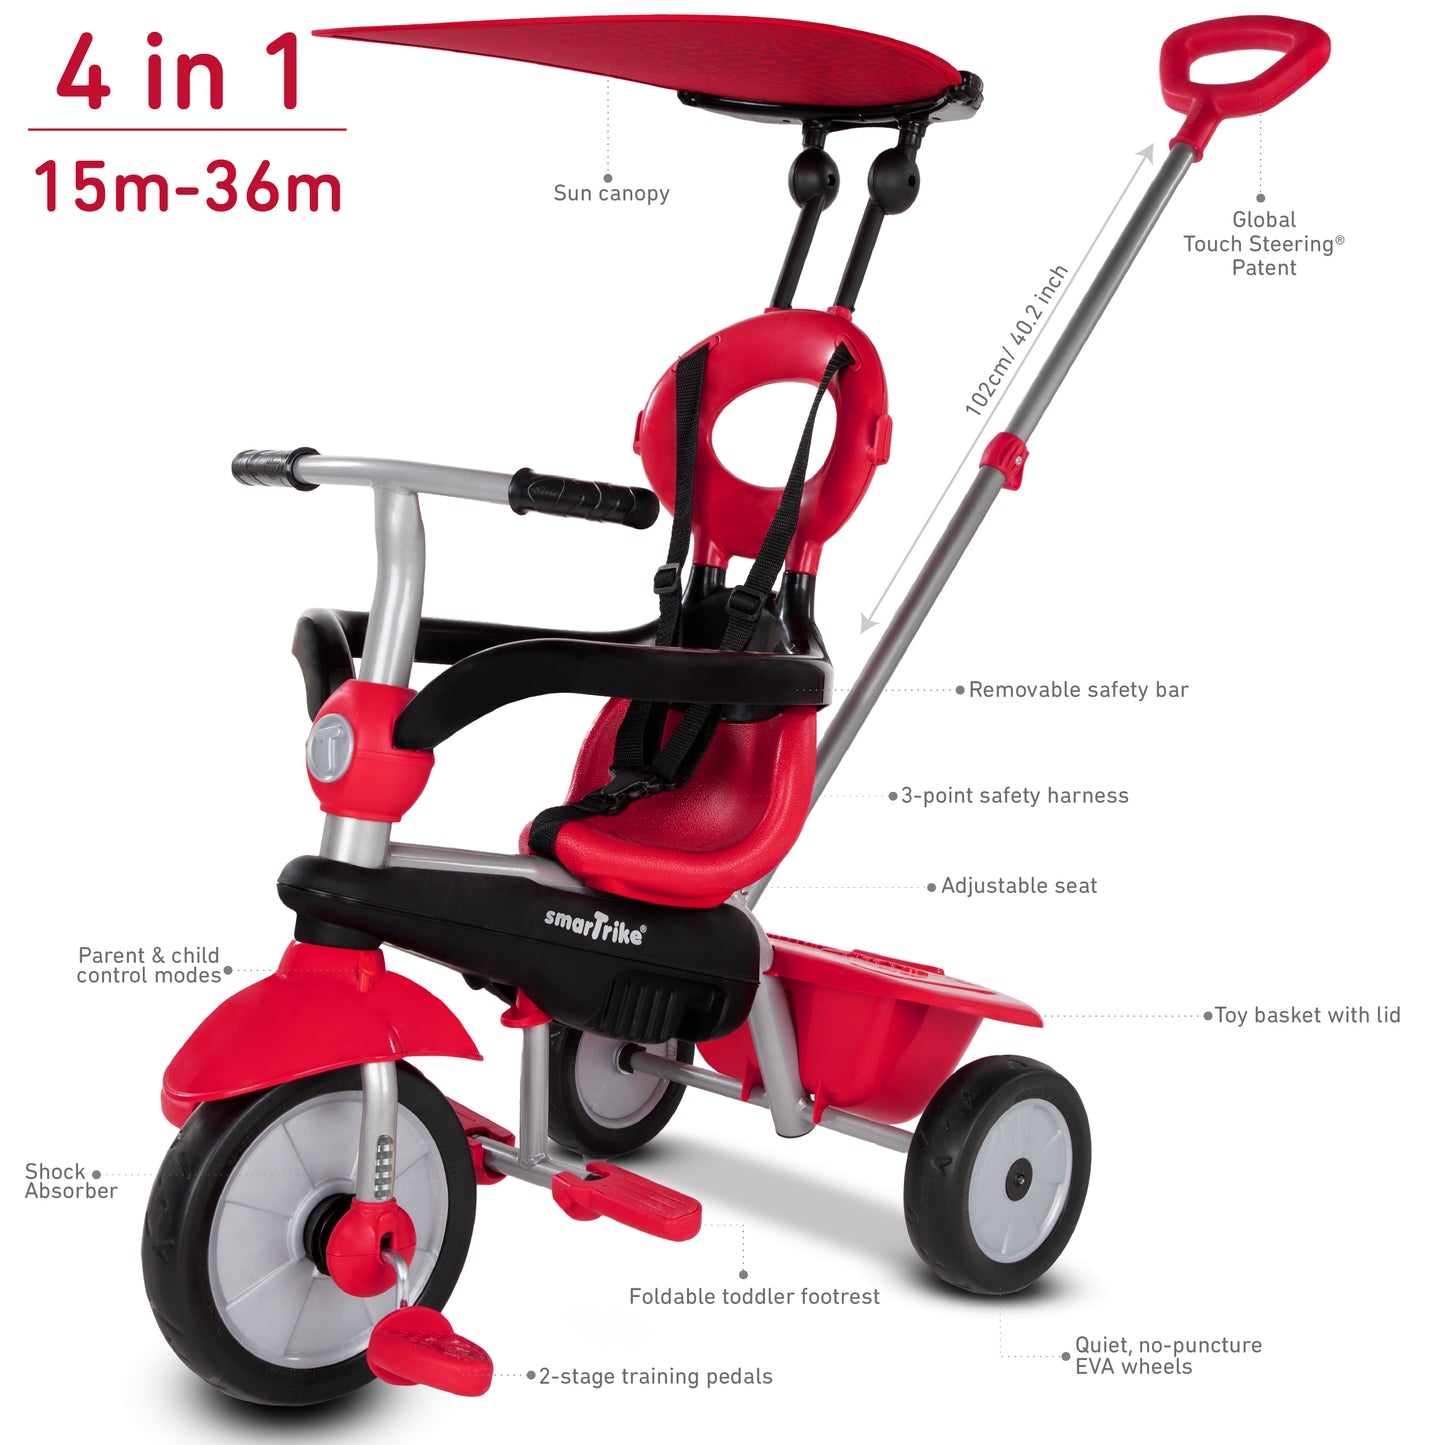 smarTrike Zoom 4 in 1 Baby Toddler Trike Tricycle - RED